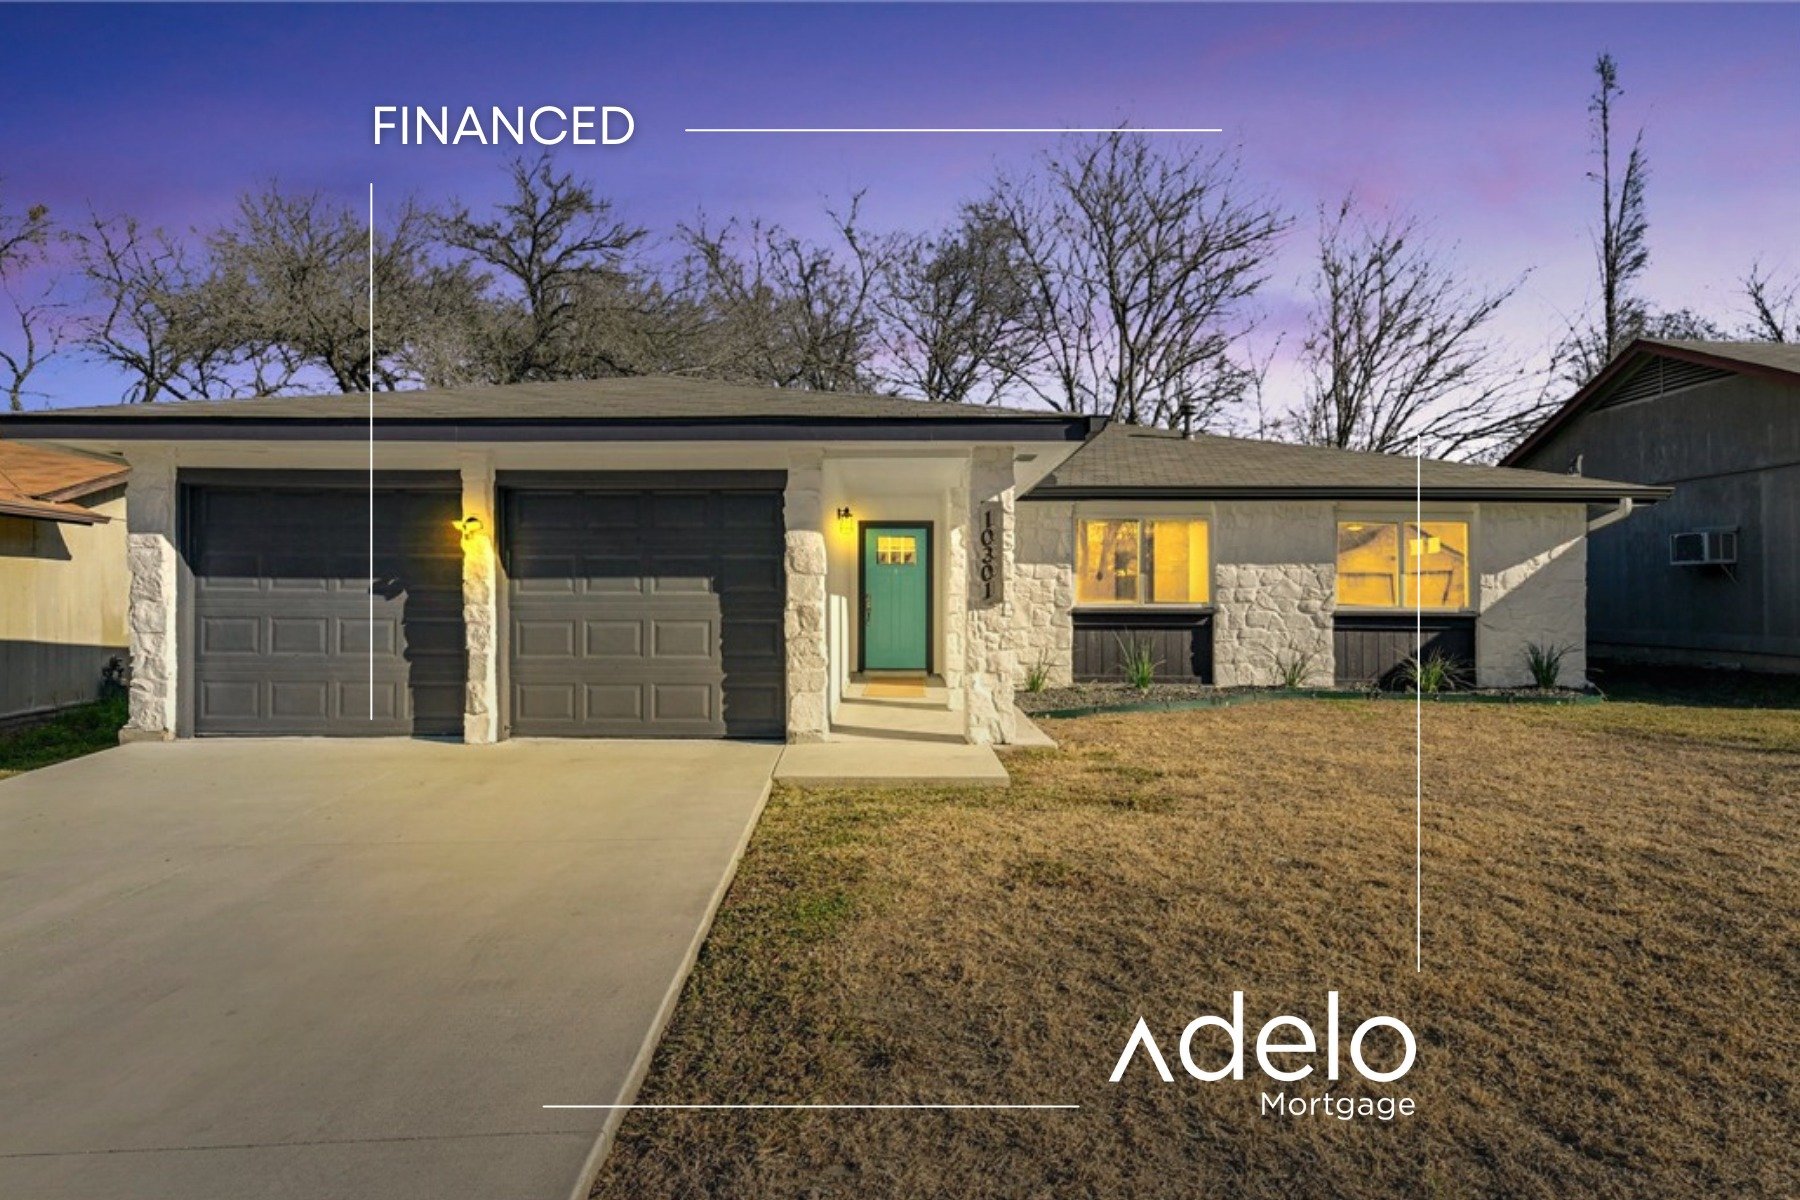 Financed by Adelo Mortgage - Austin Real Estate